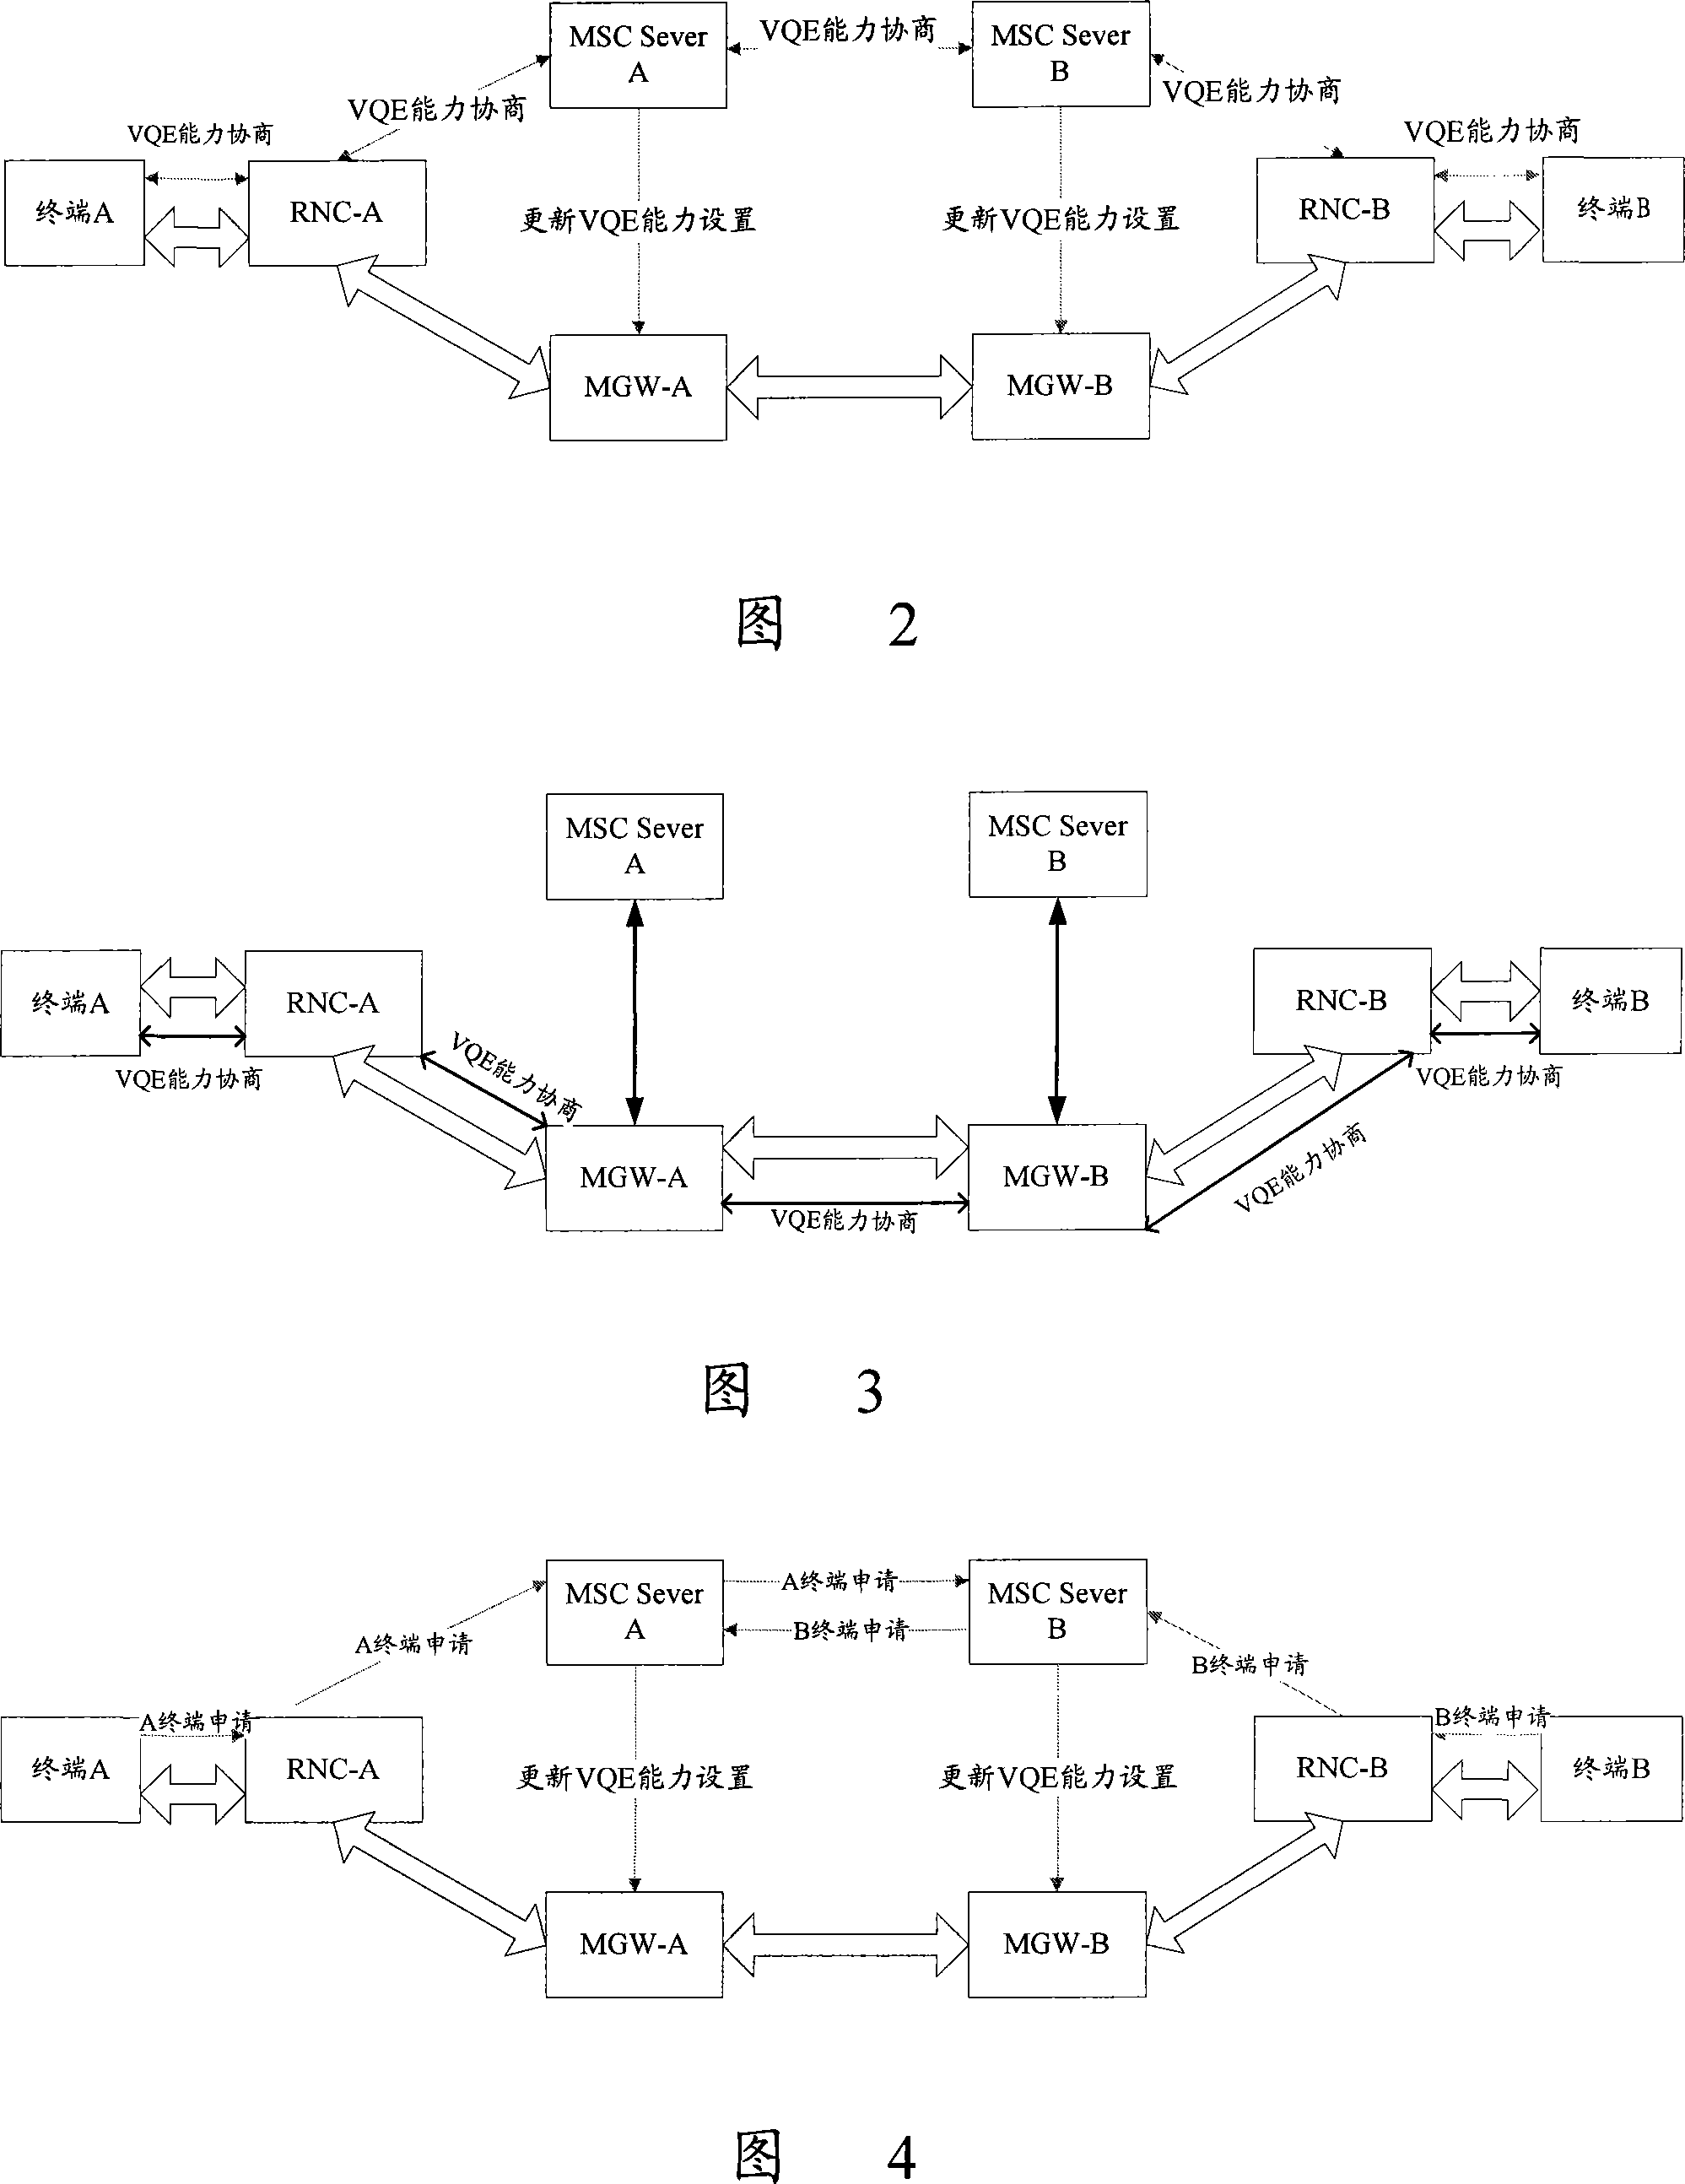 Configuration method for voice enhanced function